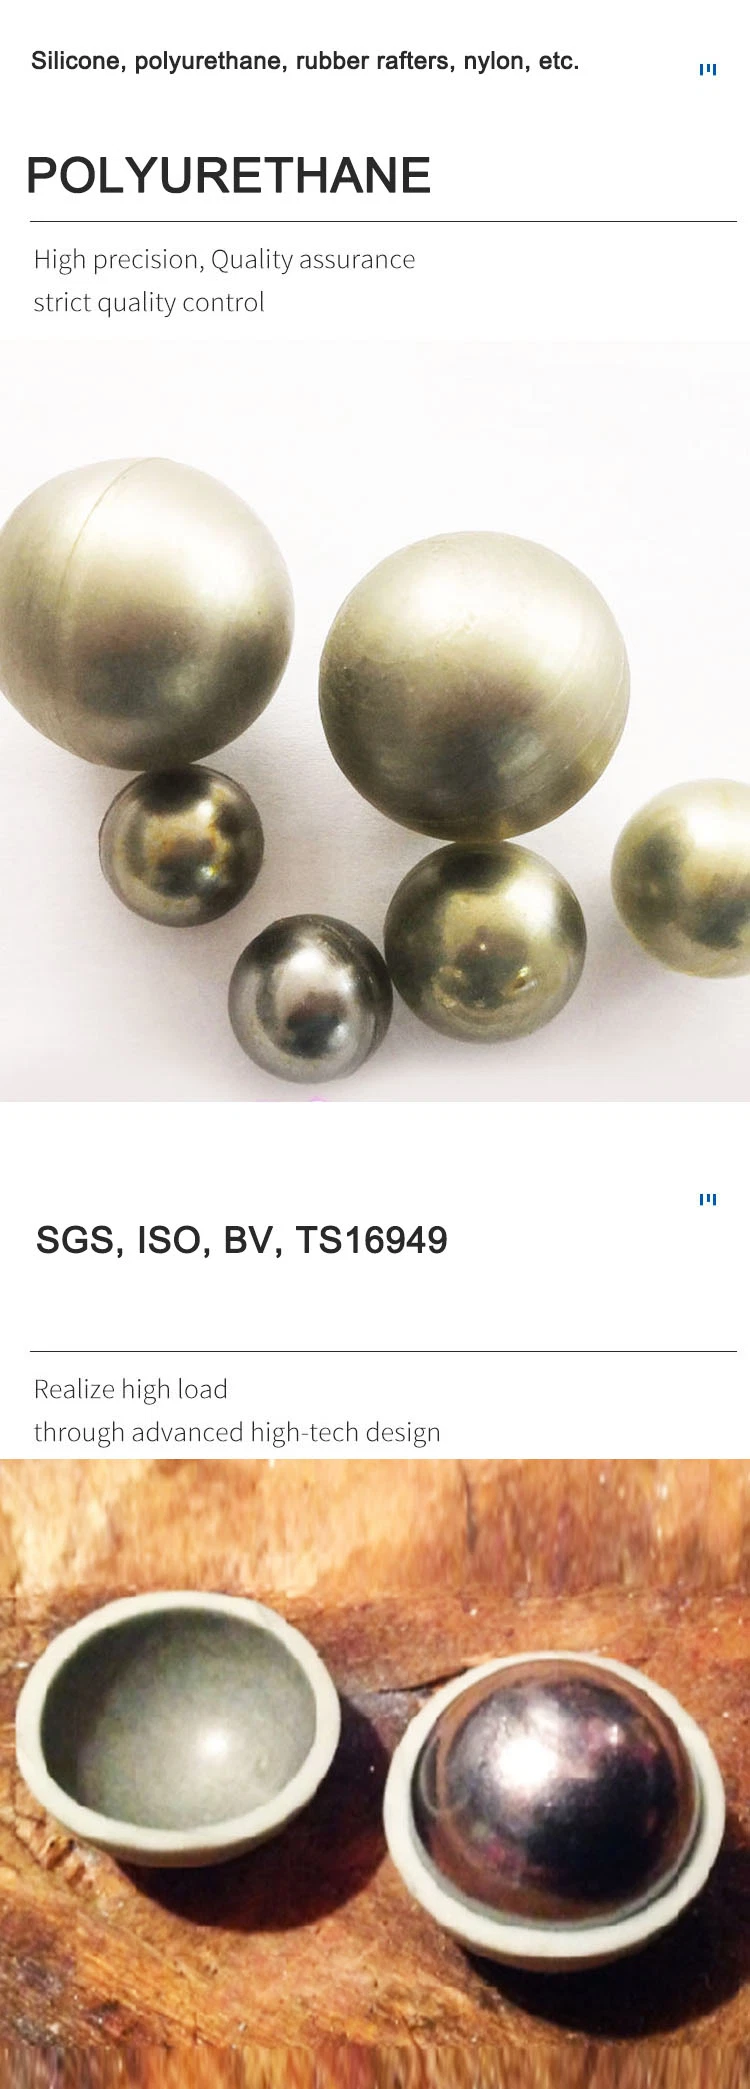 China Manufactory G50 G100 G500 3.969mm Rubber Coated Ball For Bike